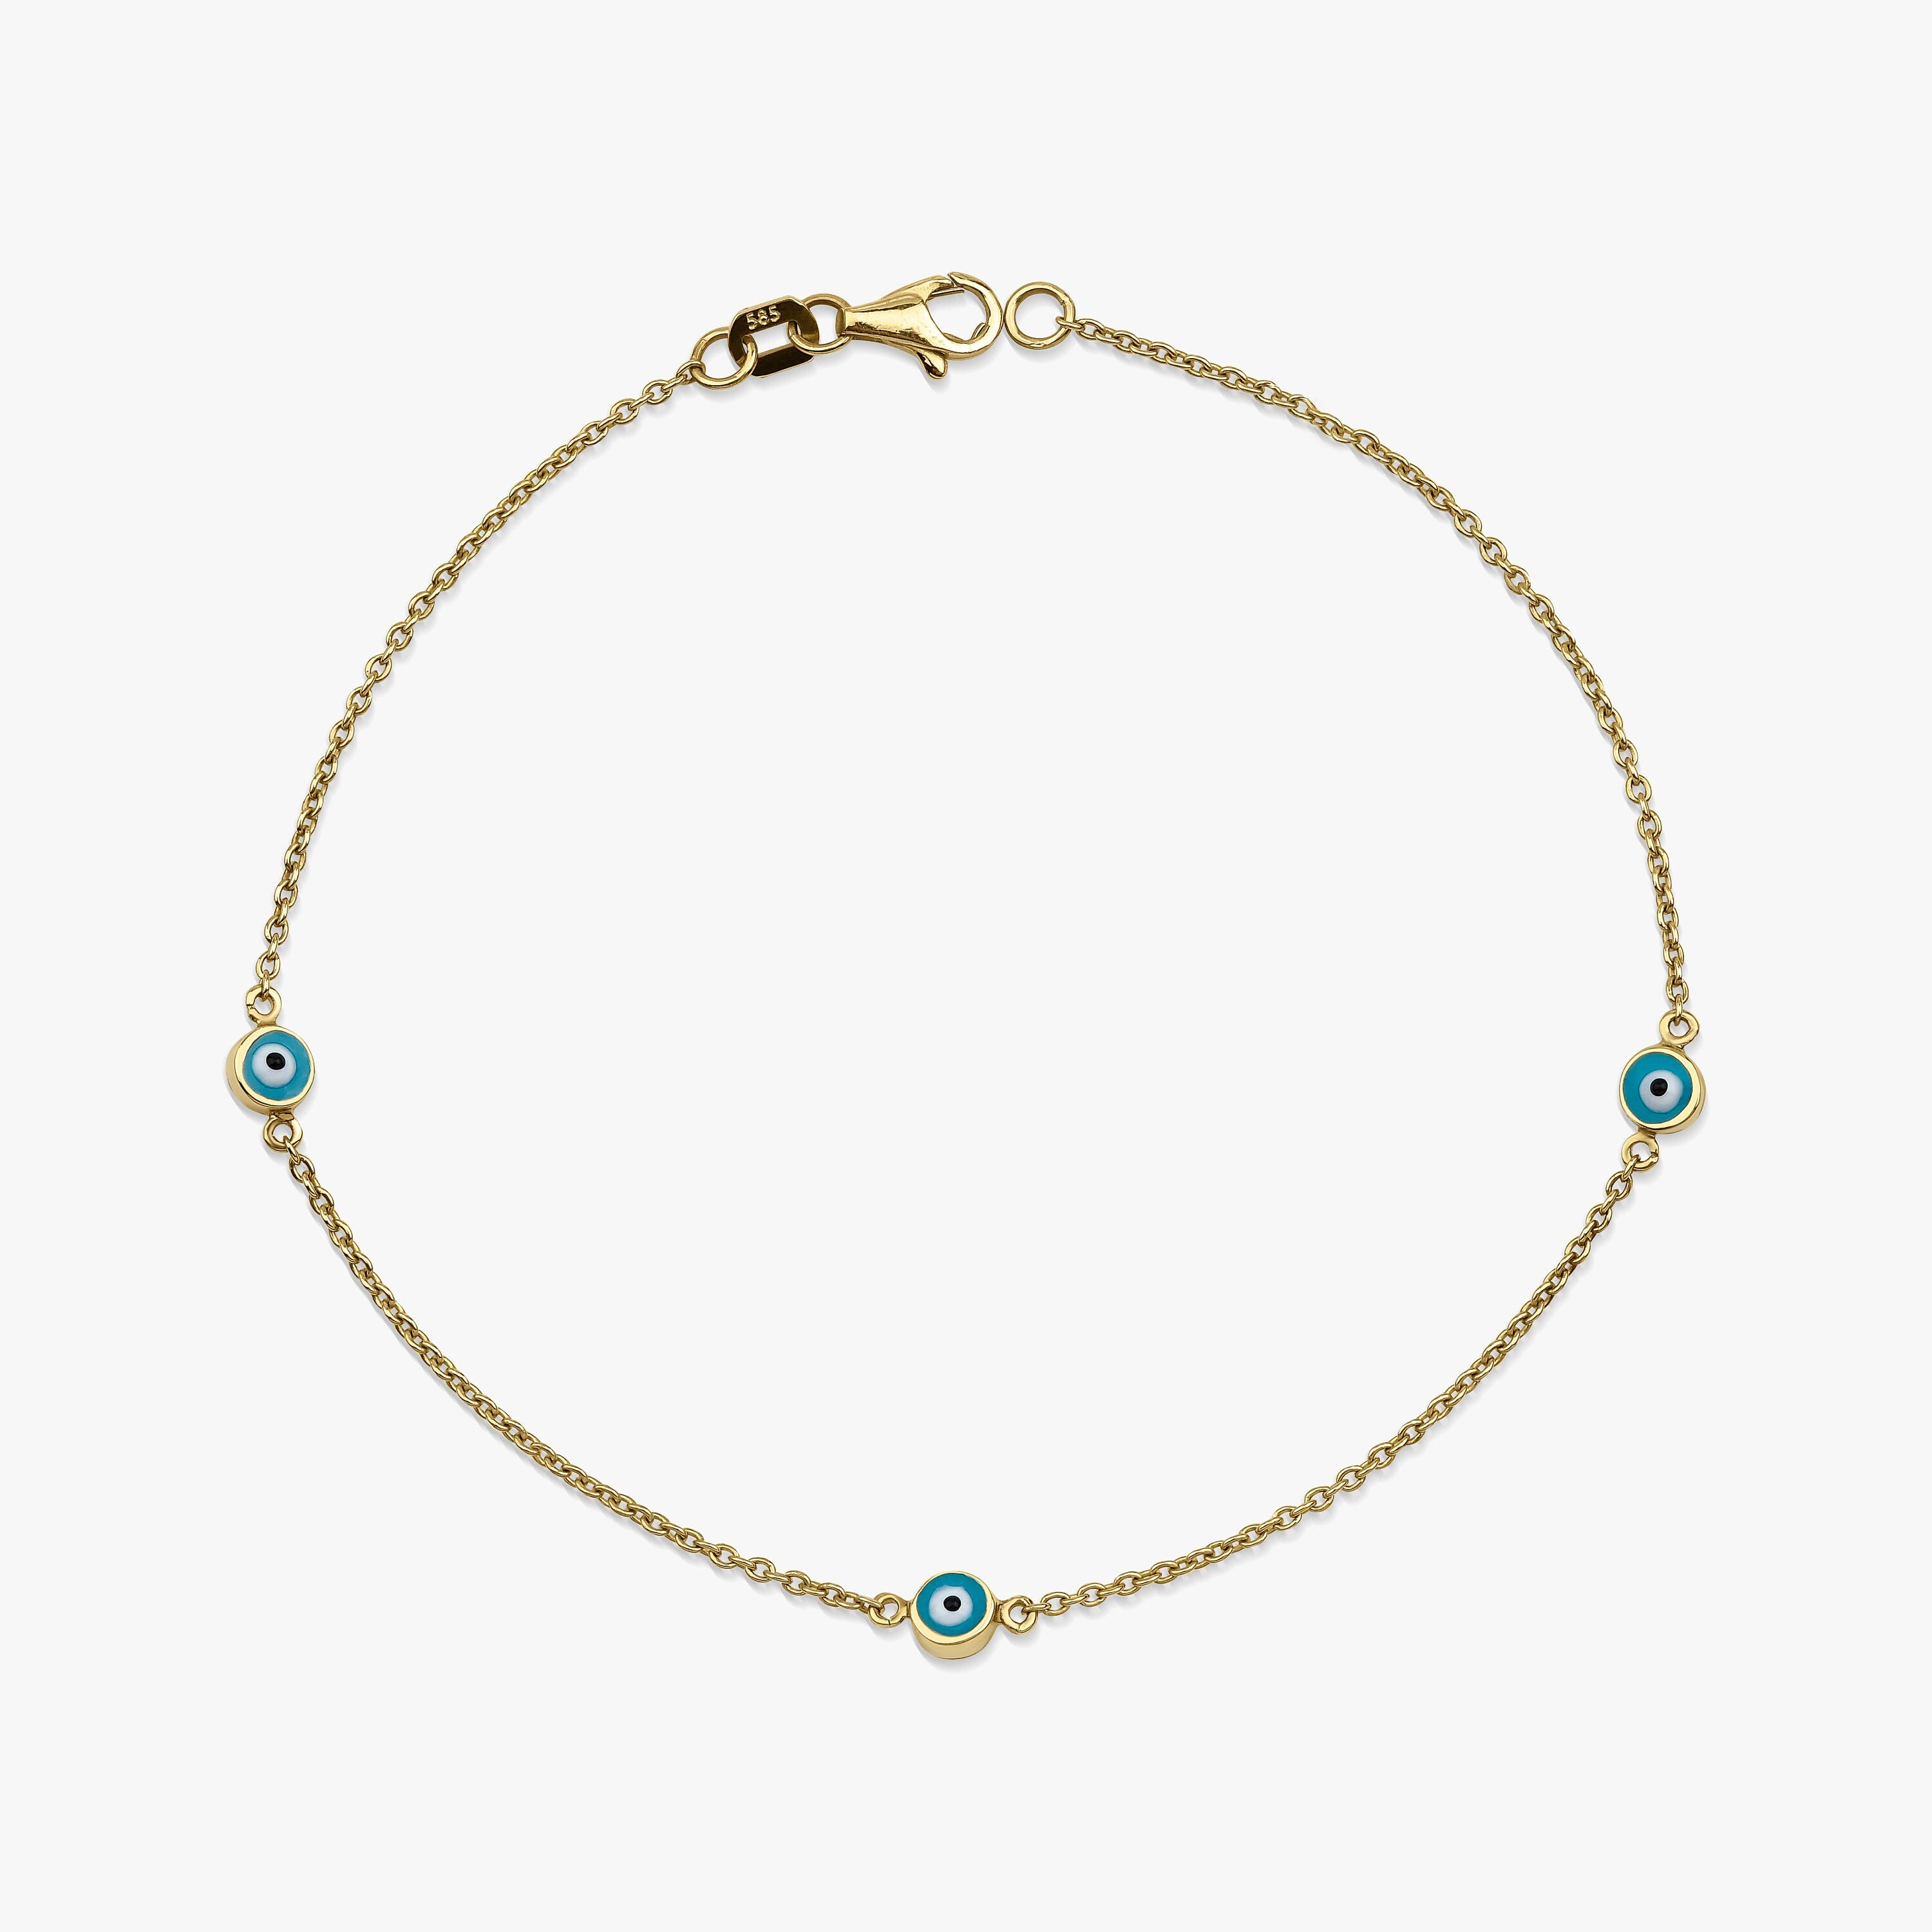 Three Evil Eye Bracelet in 14K Gold, Available in Navy Blue and Turquoise Color